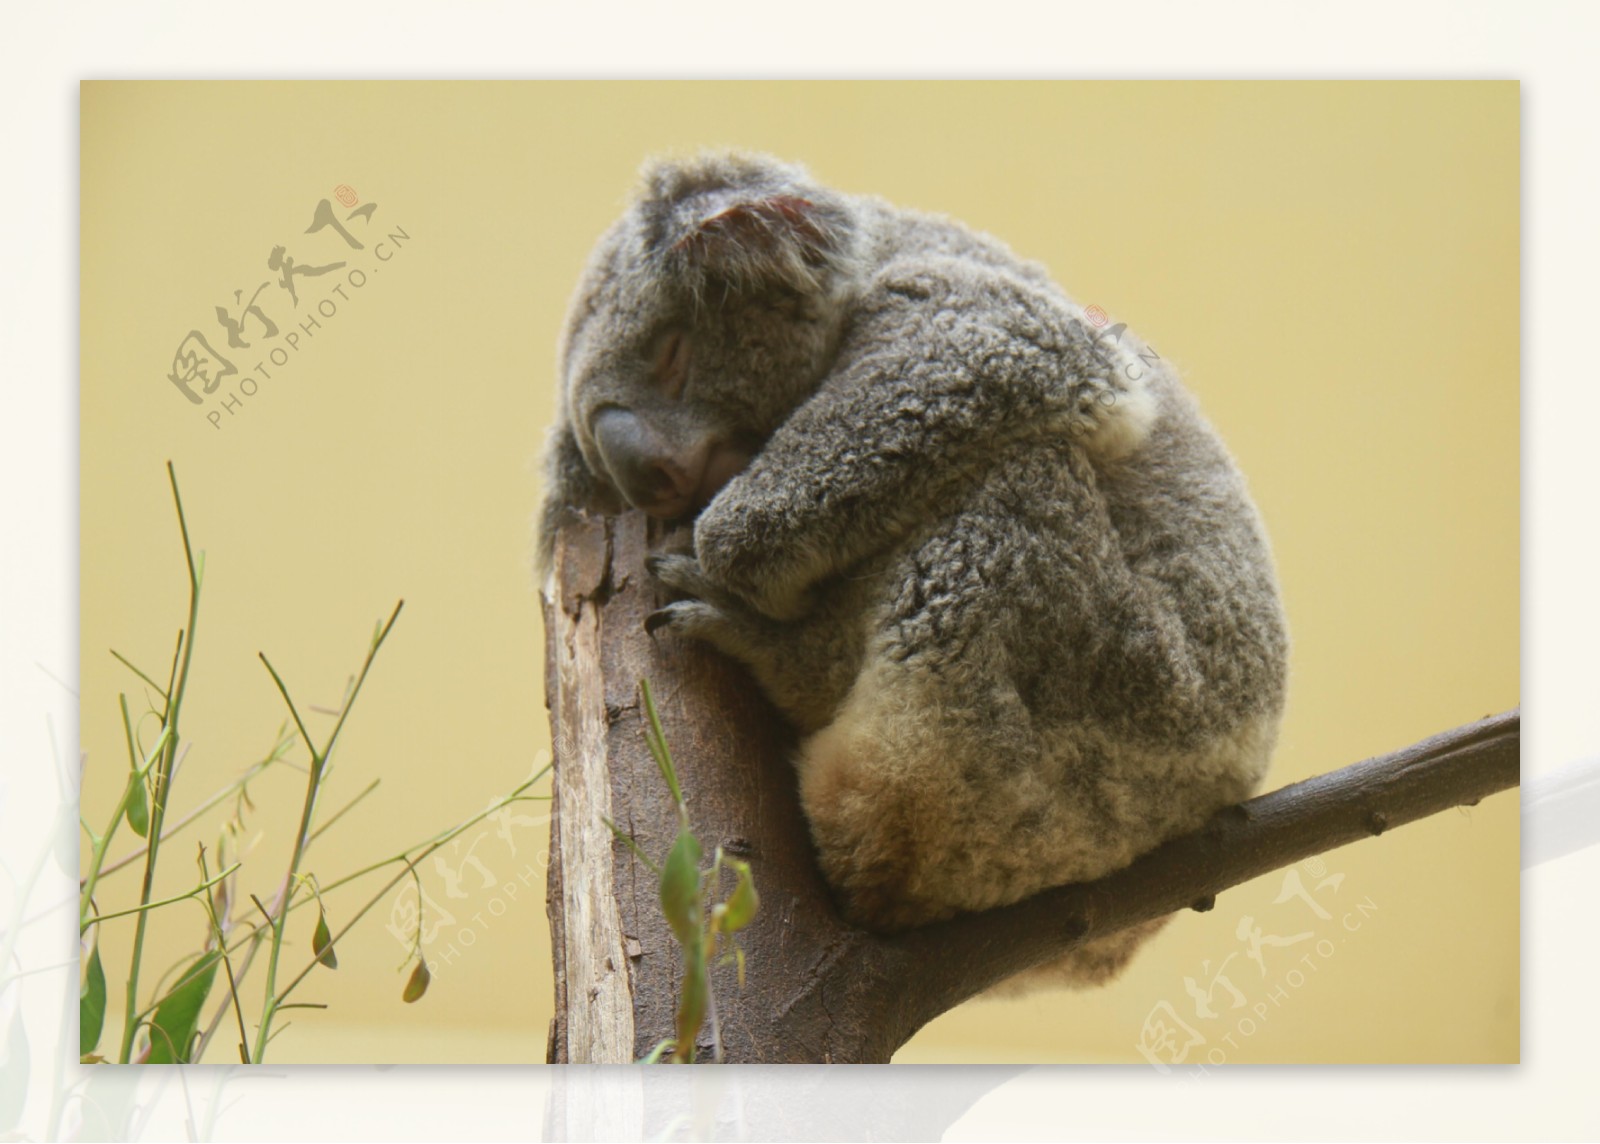 Free Images : sweet, animal, zoo, mammal, rest, fauna, primate, close ...